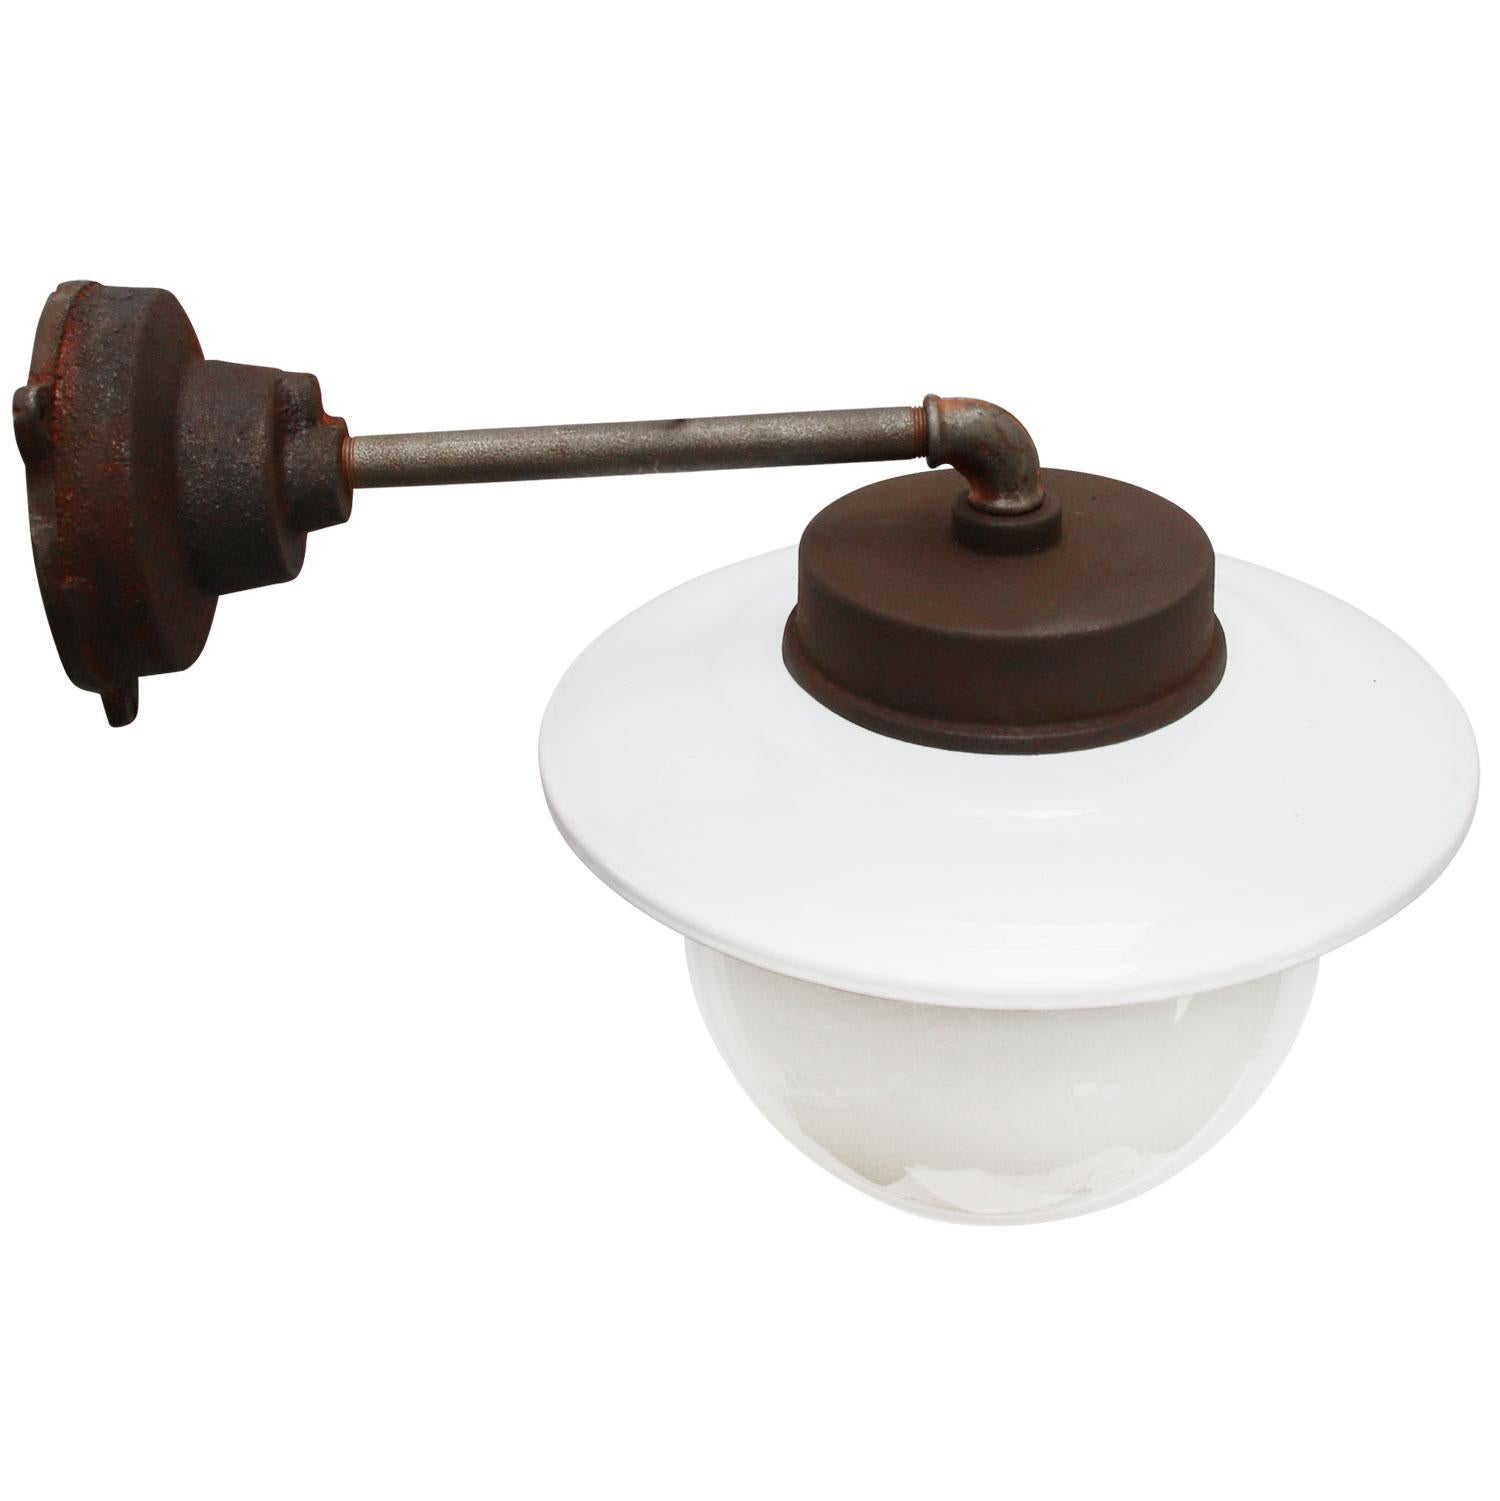 White enamel Industrial wall light.
Opaline glass. Measures: 

Diameter cast iron wall piece 12 cm. Three holes to secure.

Weight: 6.5 kg / 14.3 lb

All lamps have been made suitable by international standards for incandescent light bulbs,